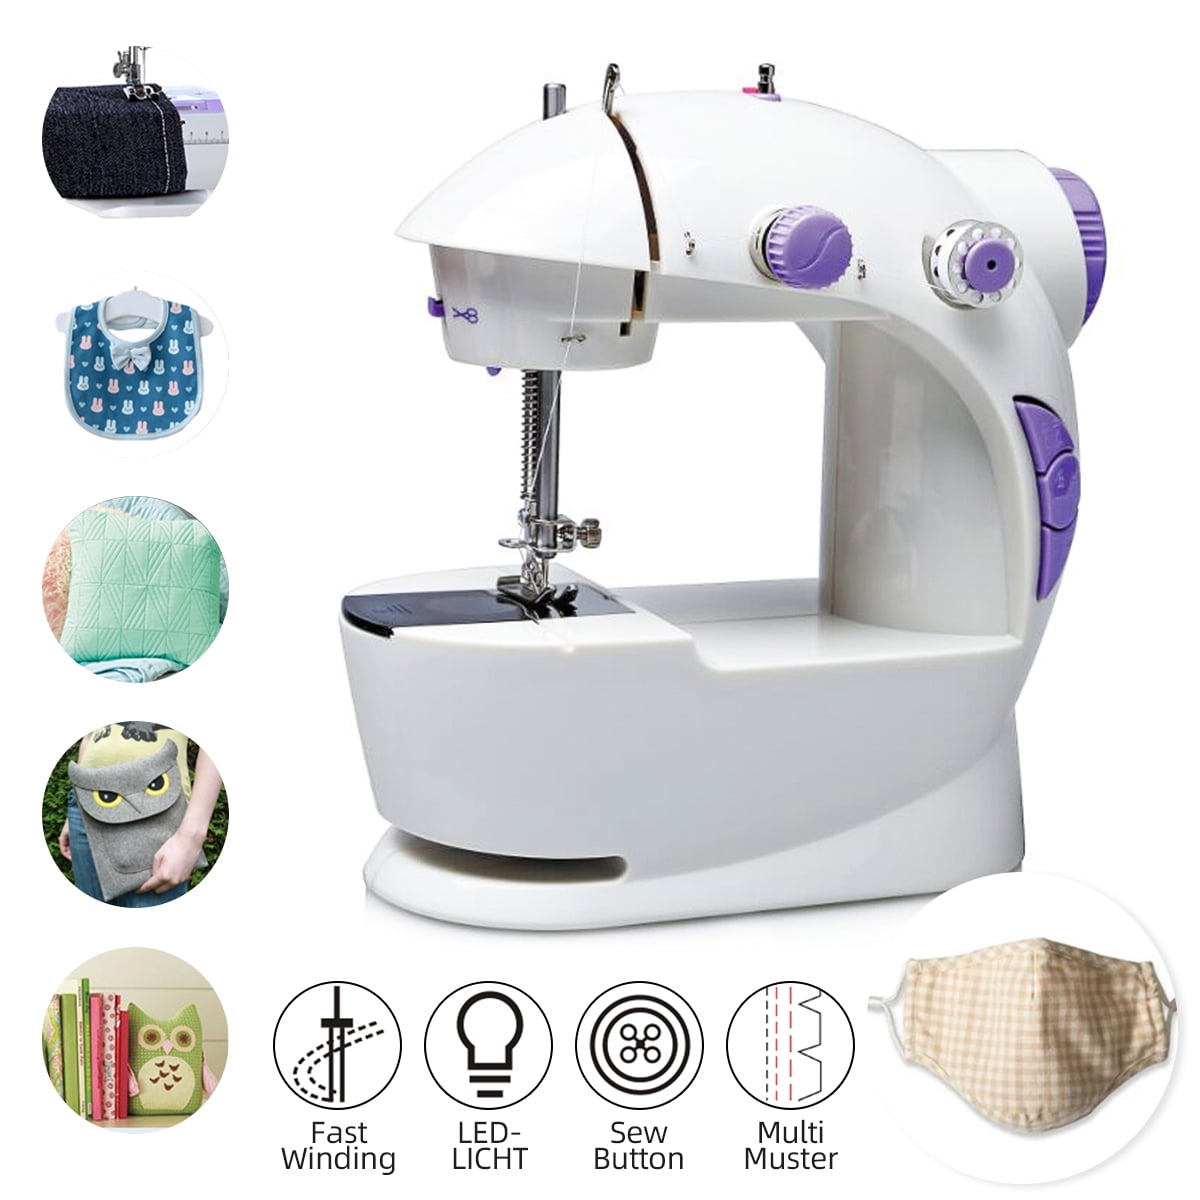 Mini Sewing Machine 10PCS Kit Portable Electric Crafting Mending Machine 2-Speed Double Thread with Foot Pedal for Household Travel Beginner